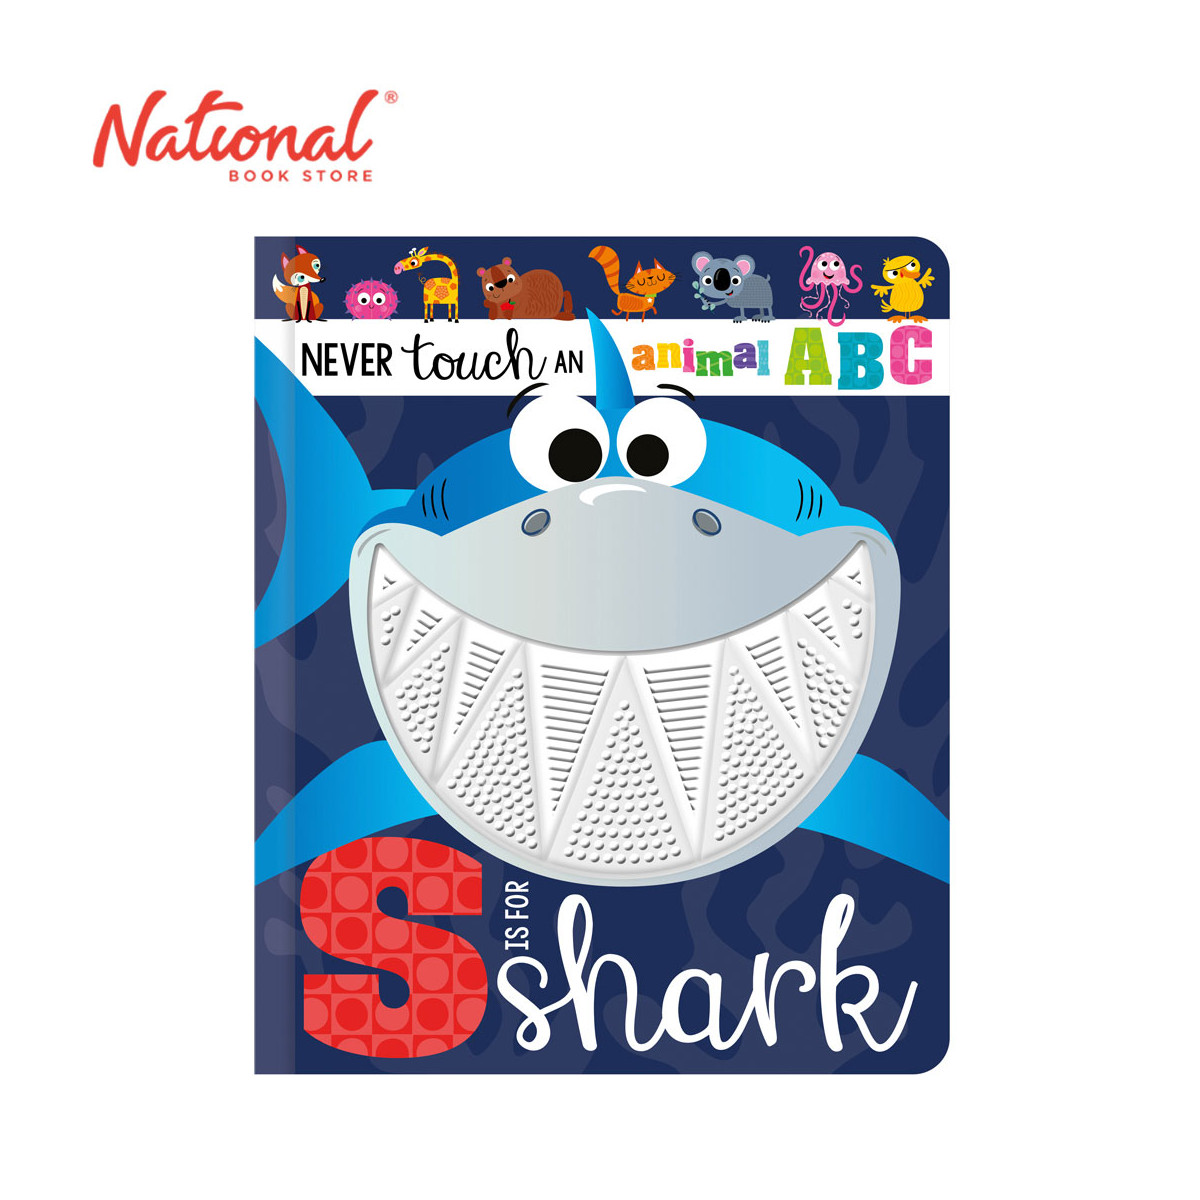 Never Touch An Animal ABC: S Is For Shark - Board Book - Preschool Books